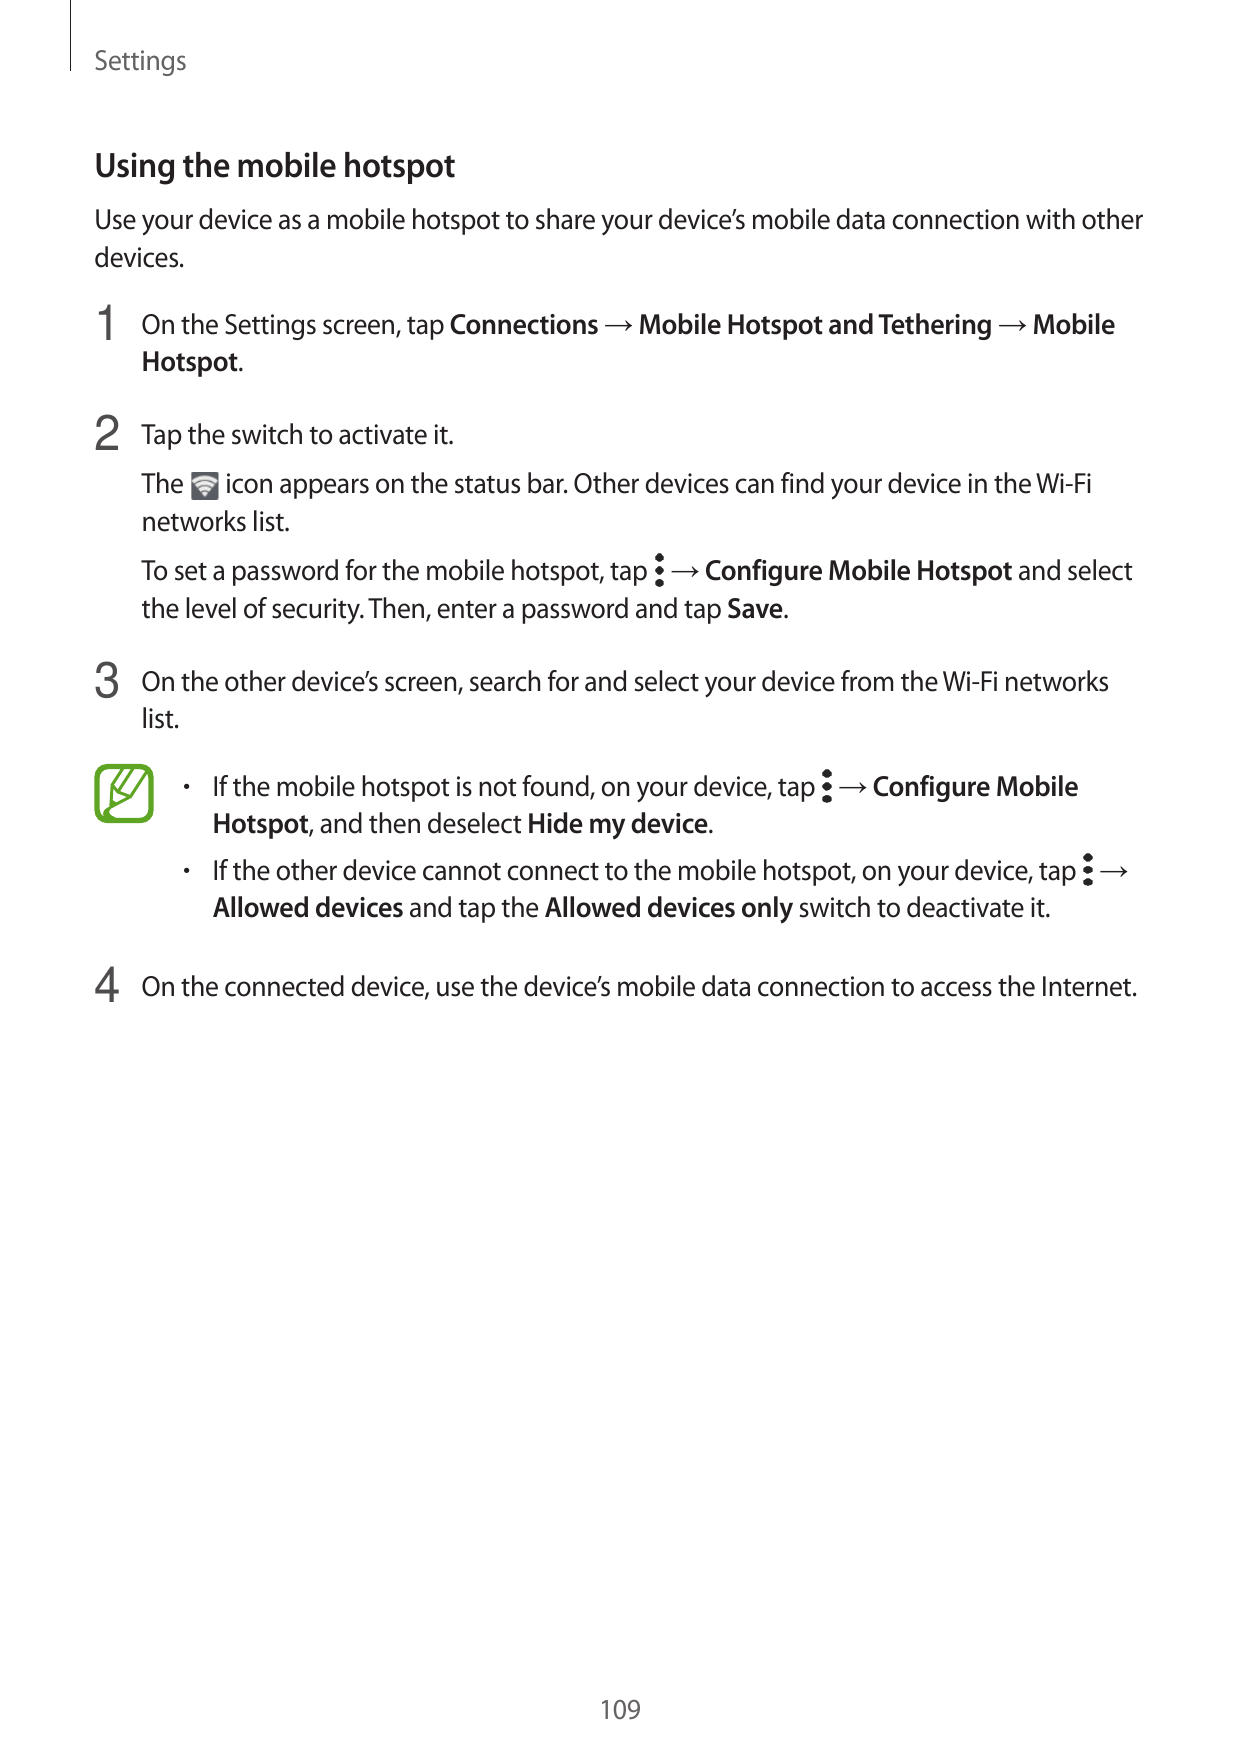 SettingsUsing the mobile hotspotUse your device as a mobile hotspot to share your device’s mobile data connection with otherdevi